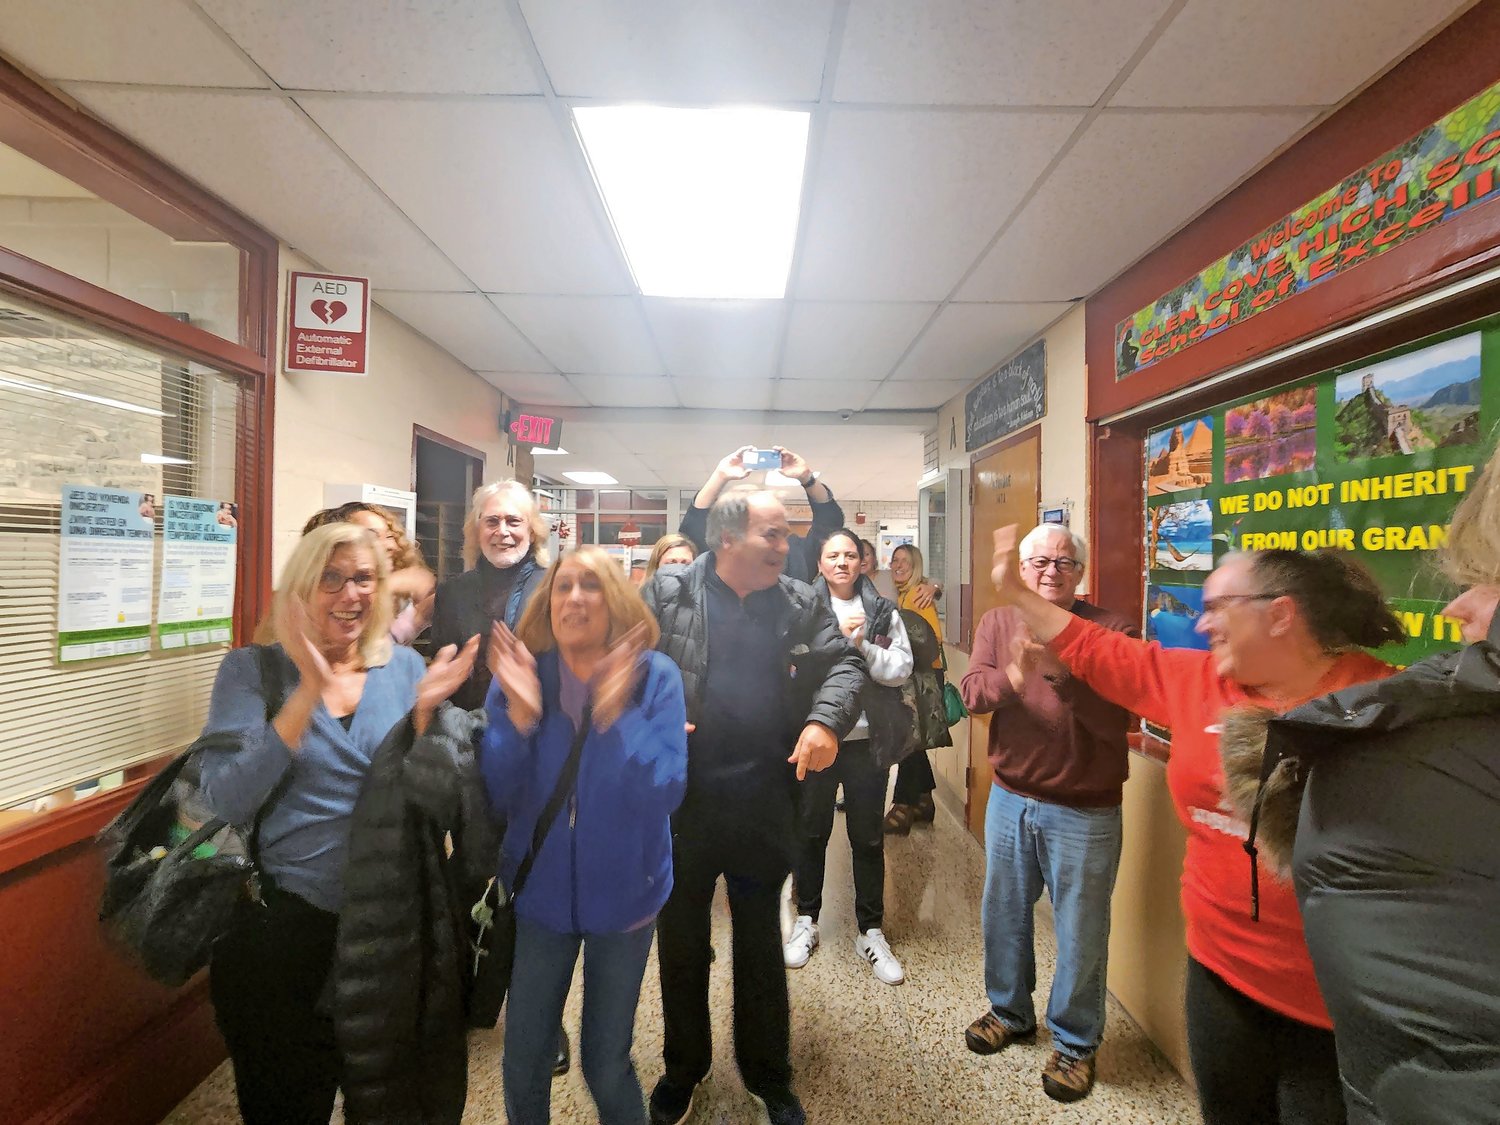 The moment the small crowd learned a $30.5 million bond referendum for the Glen Cove City School District had passed, a number of high-fives and hugs were exchanged, while others wiped away tears.